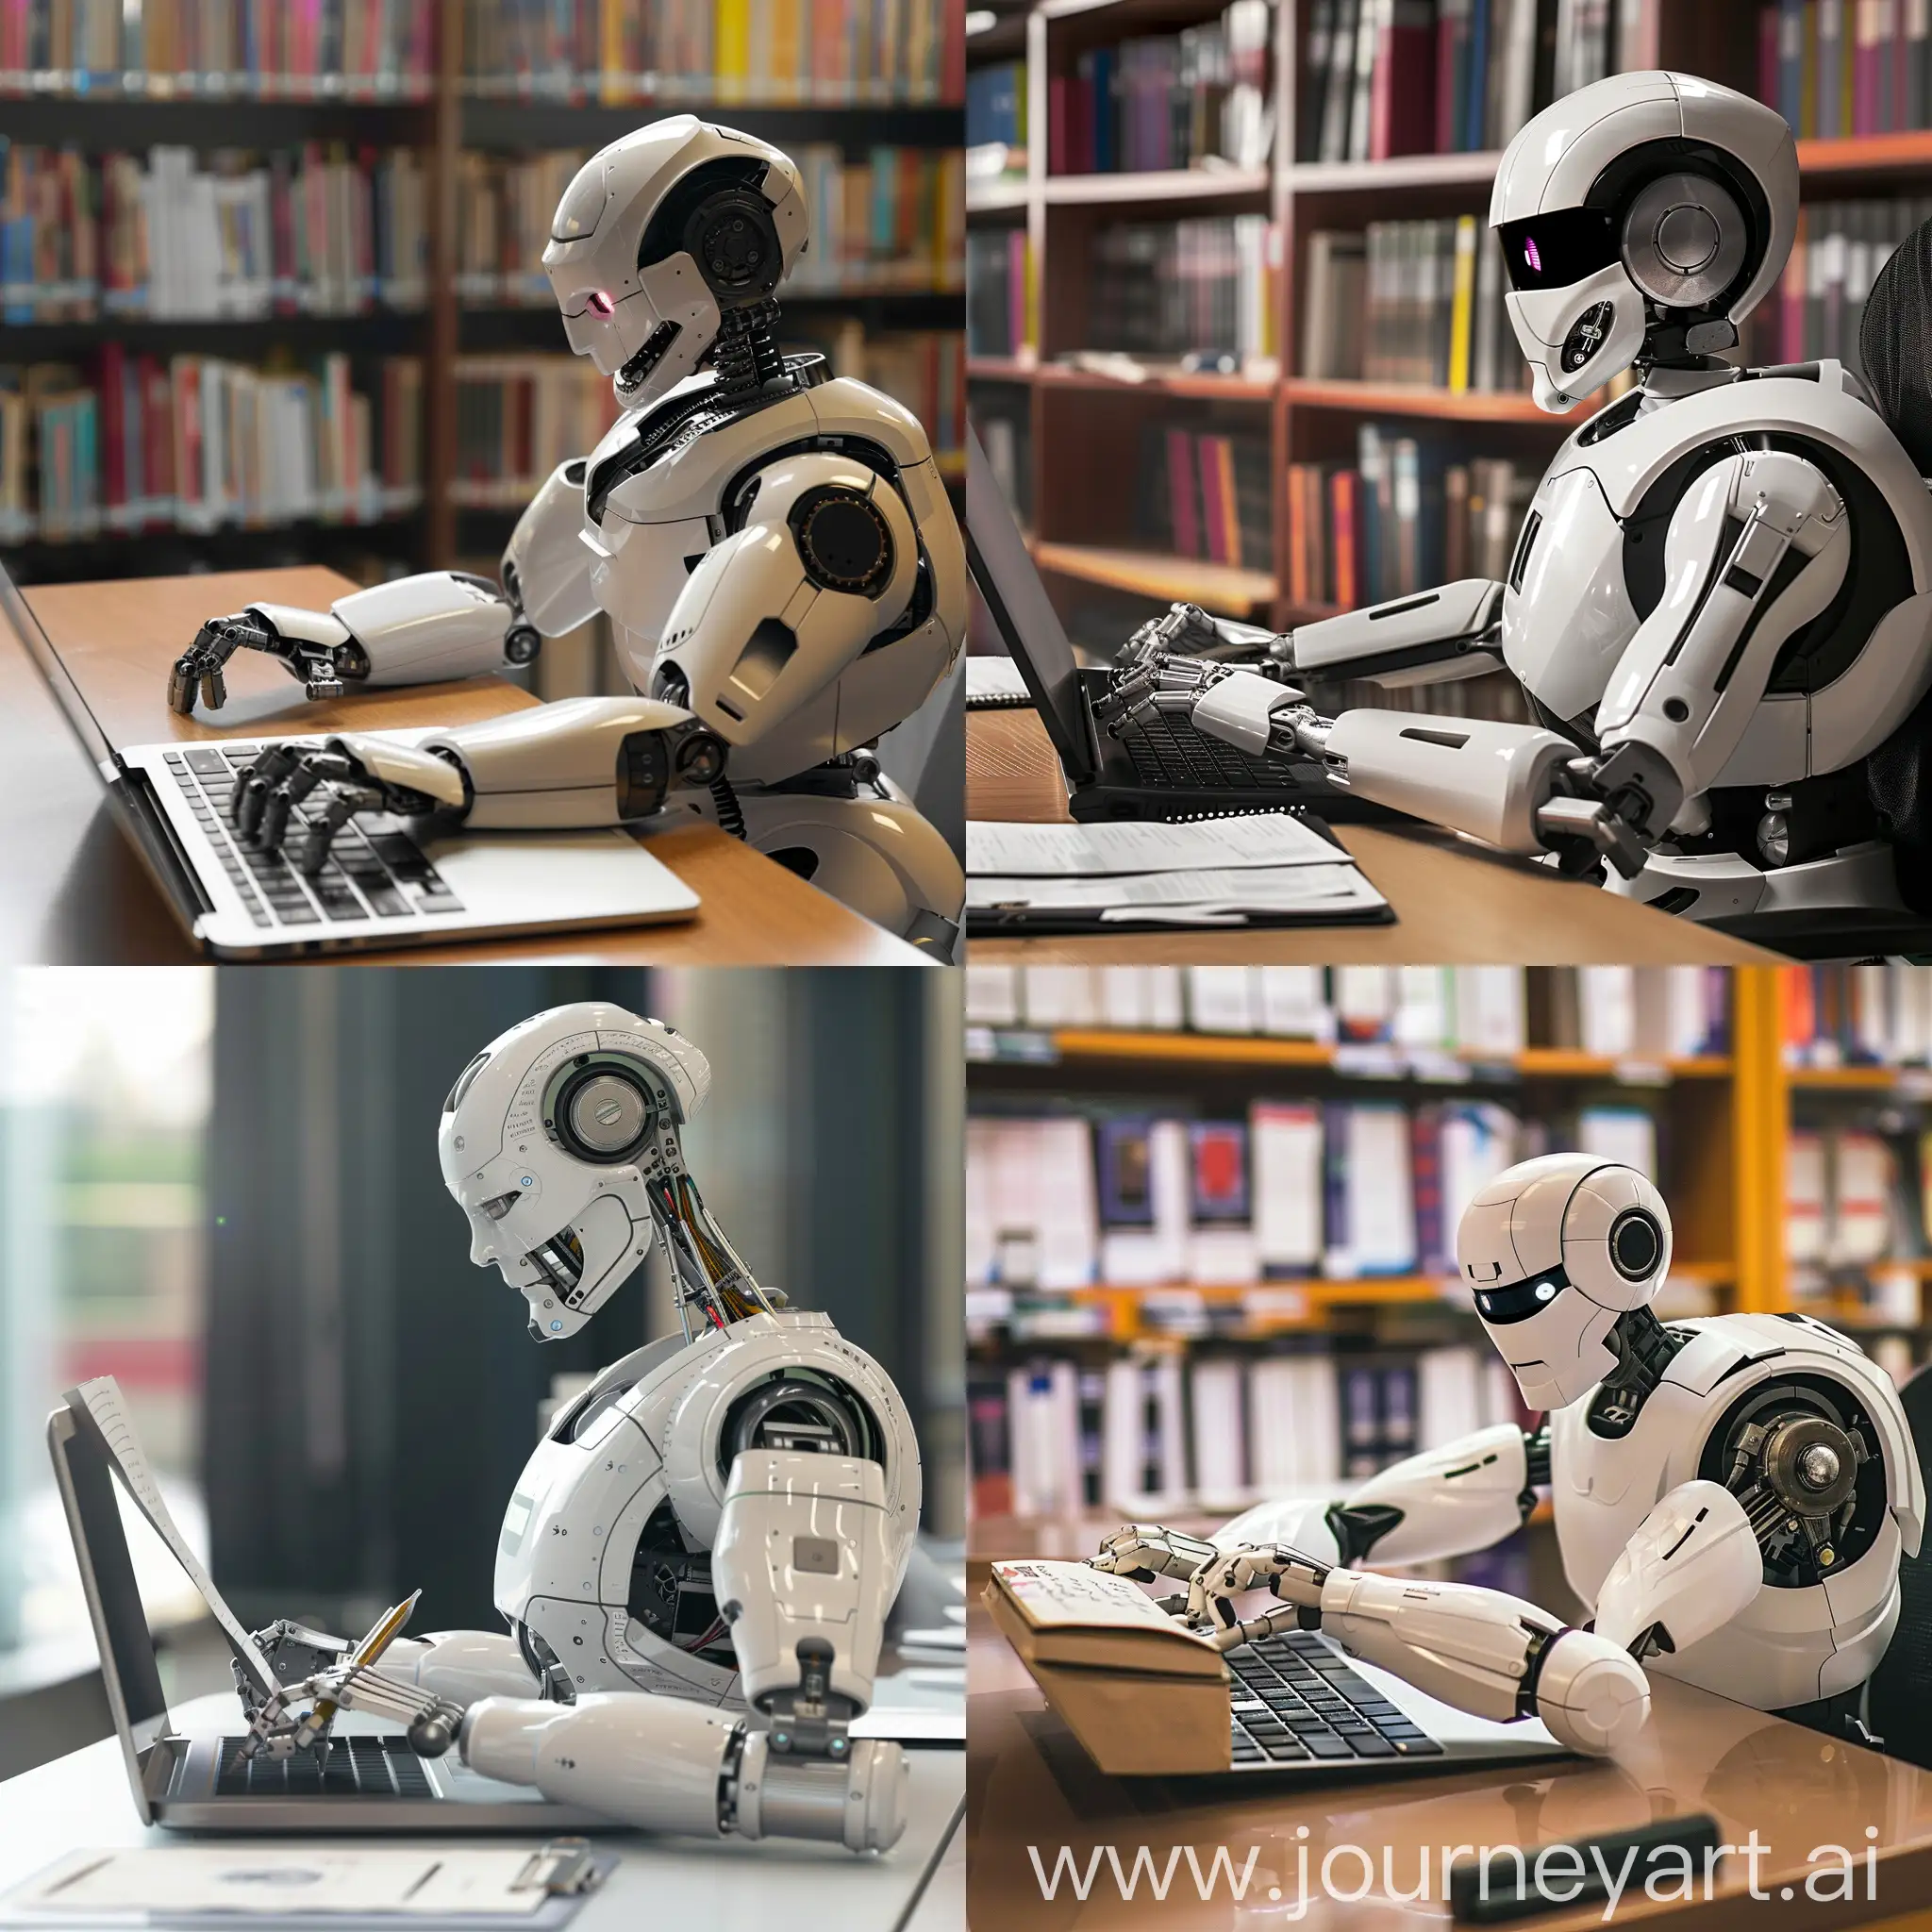 Robot-Typing-University-Assignment-Version-6